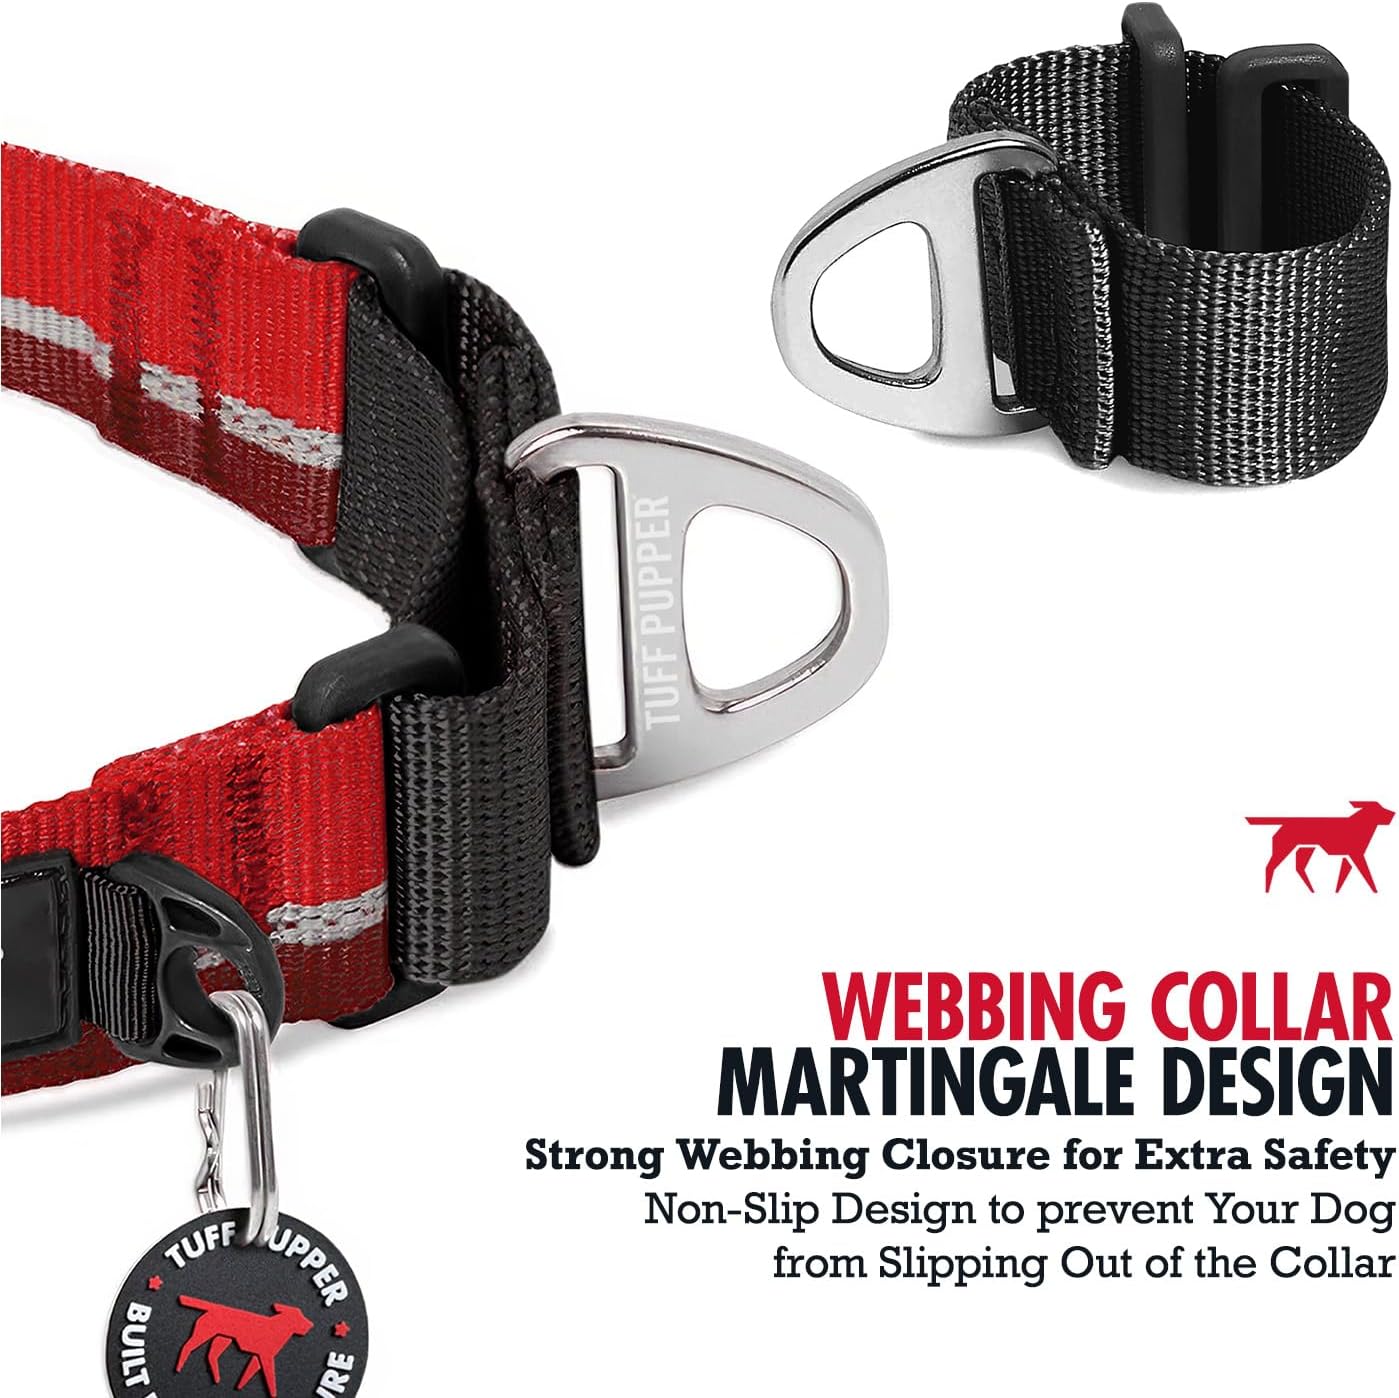 Tuff Pupper Martingale Collar for Dogs | Gentle Nylon Limited Cinch is Perfect for Training | Durable Locking Buckle | Reflective for Safer Night Walking | Sizing for All Breeds (Blue, Medium)